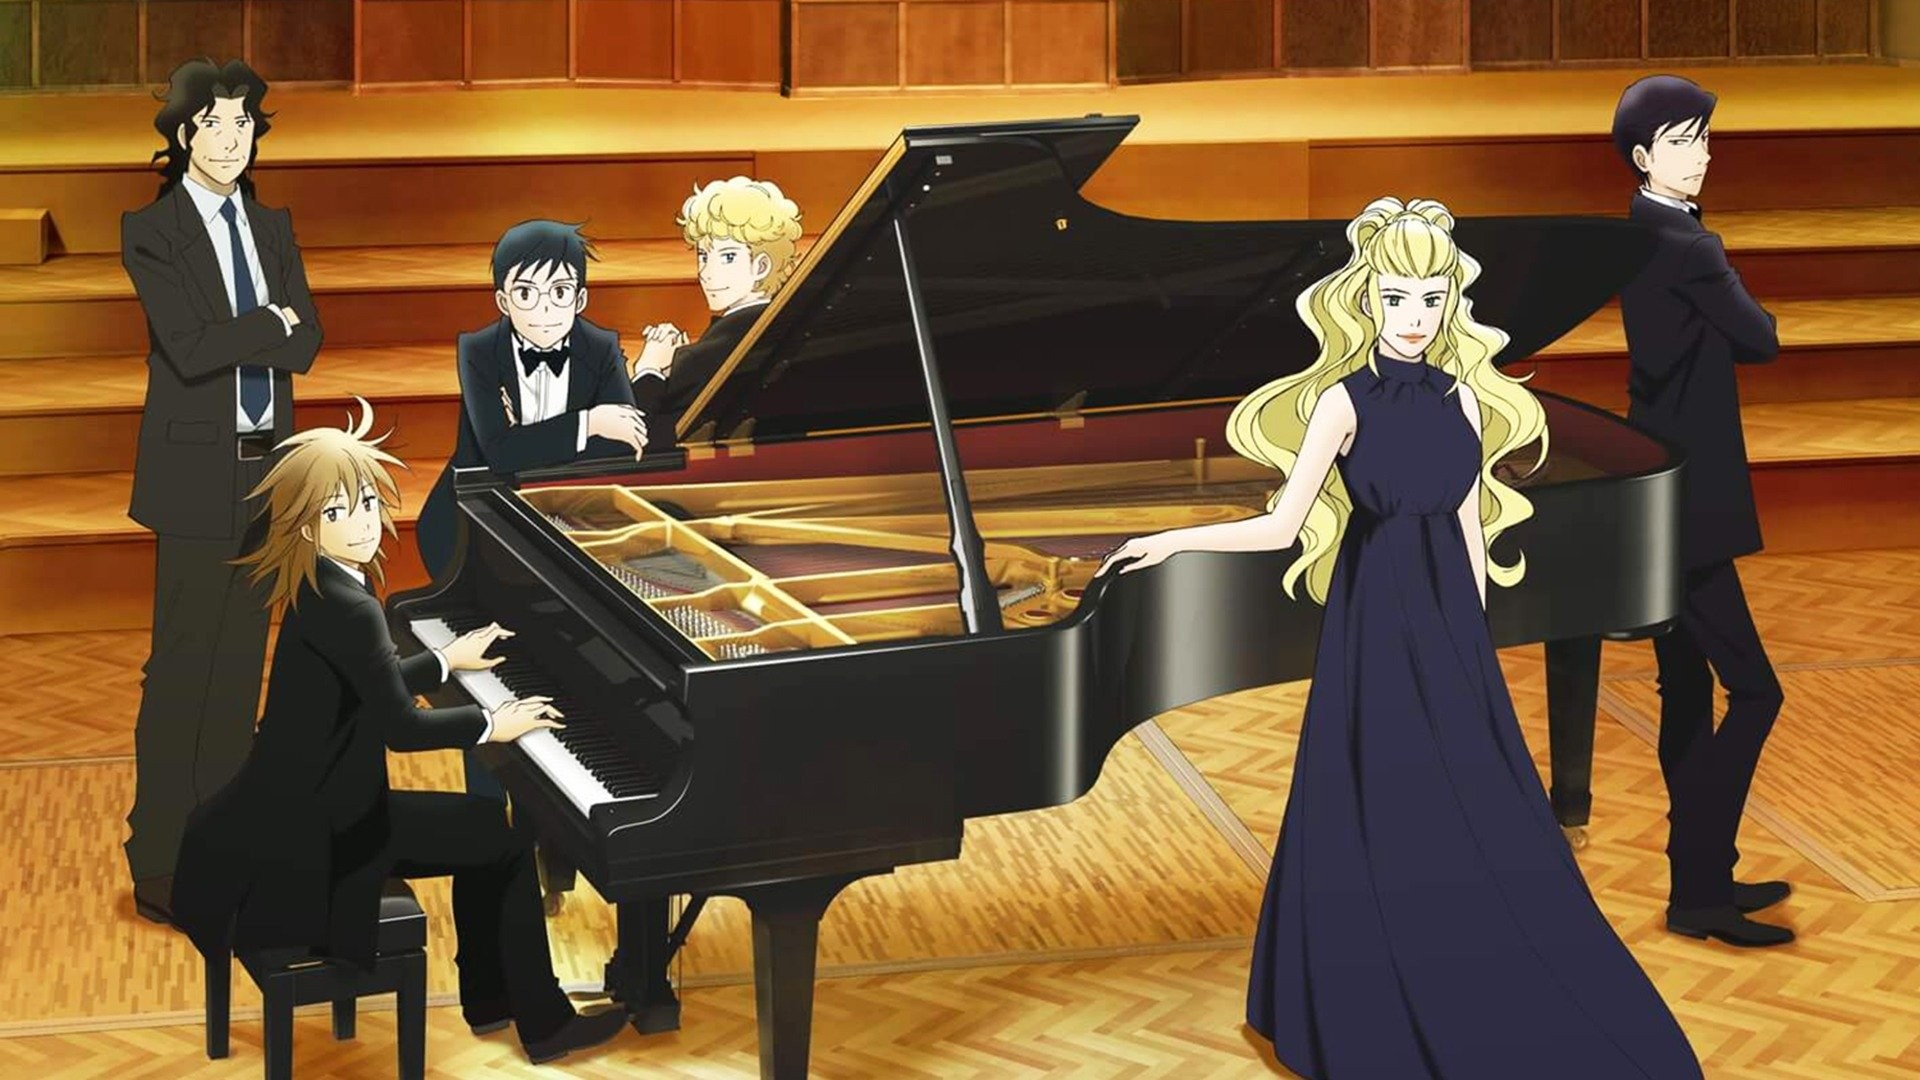 The Piano Forest Introduces Pianists and Trailer for Anime | by Rog Wah |  Medium